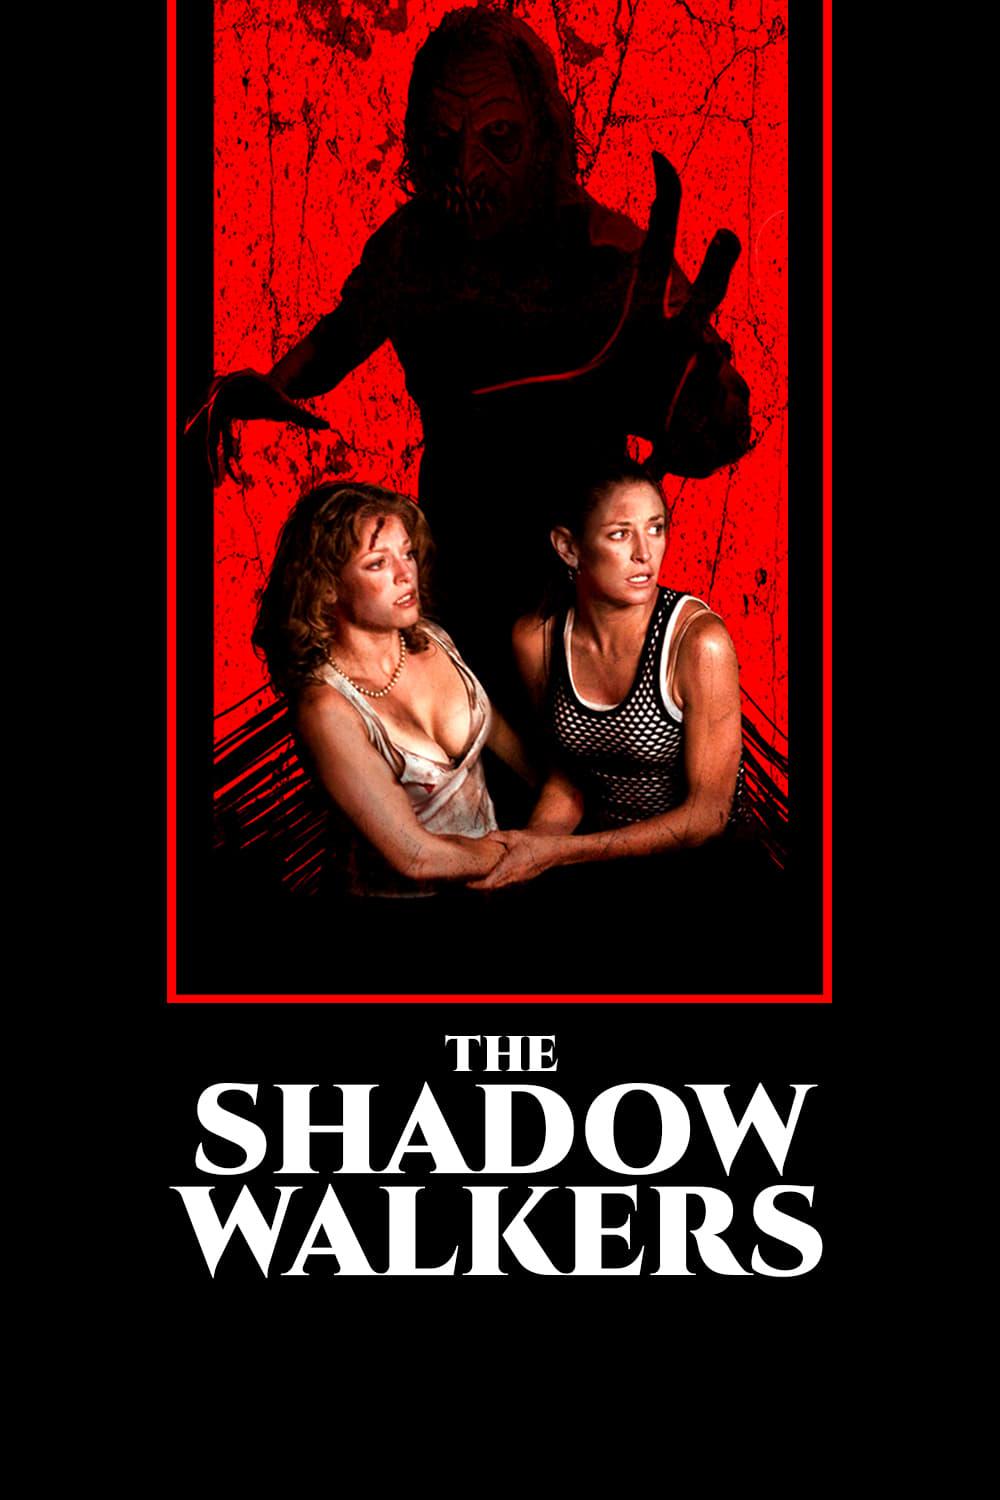 The Shadow Walkers poster